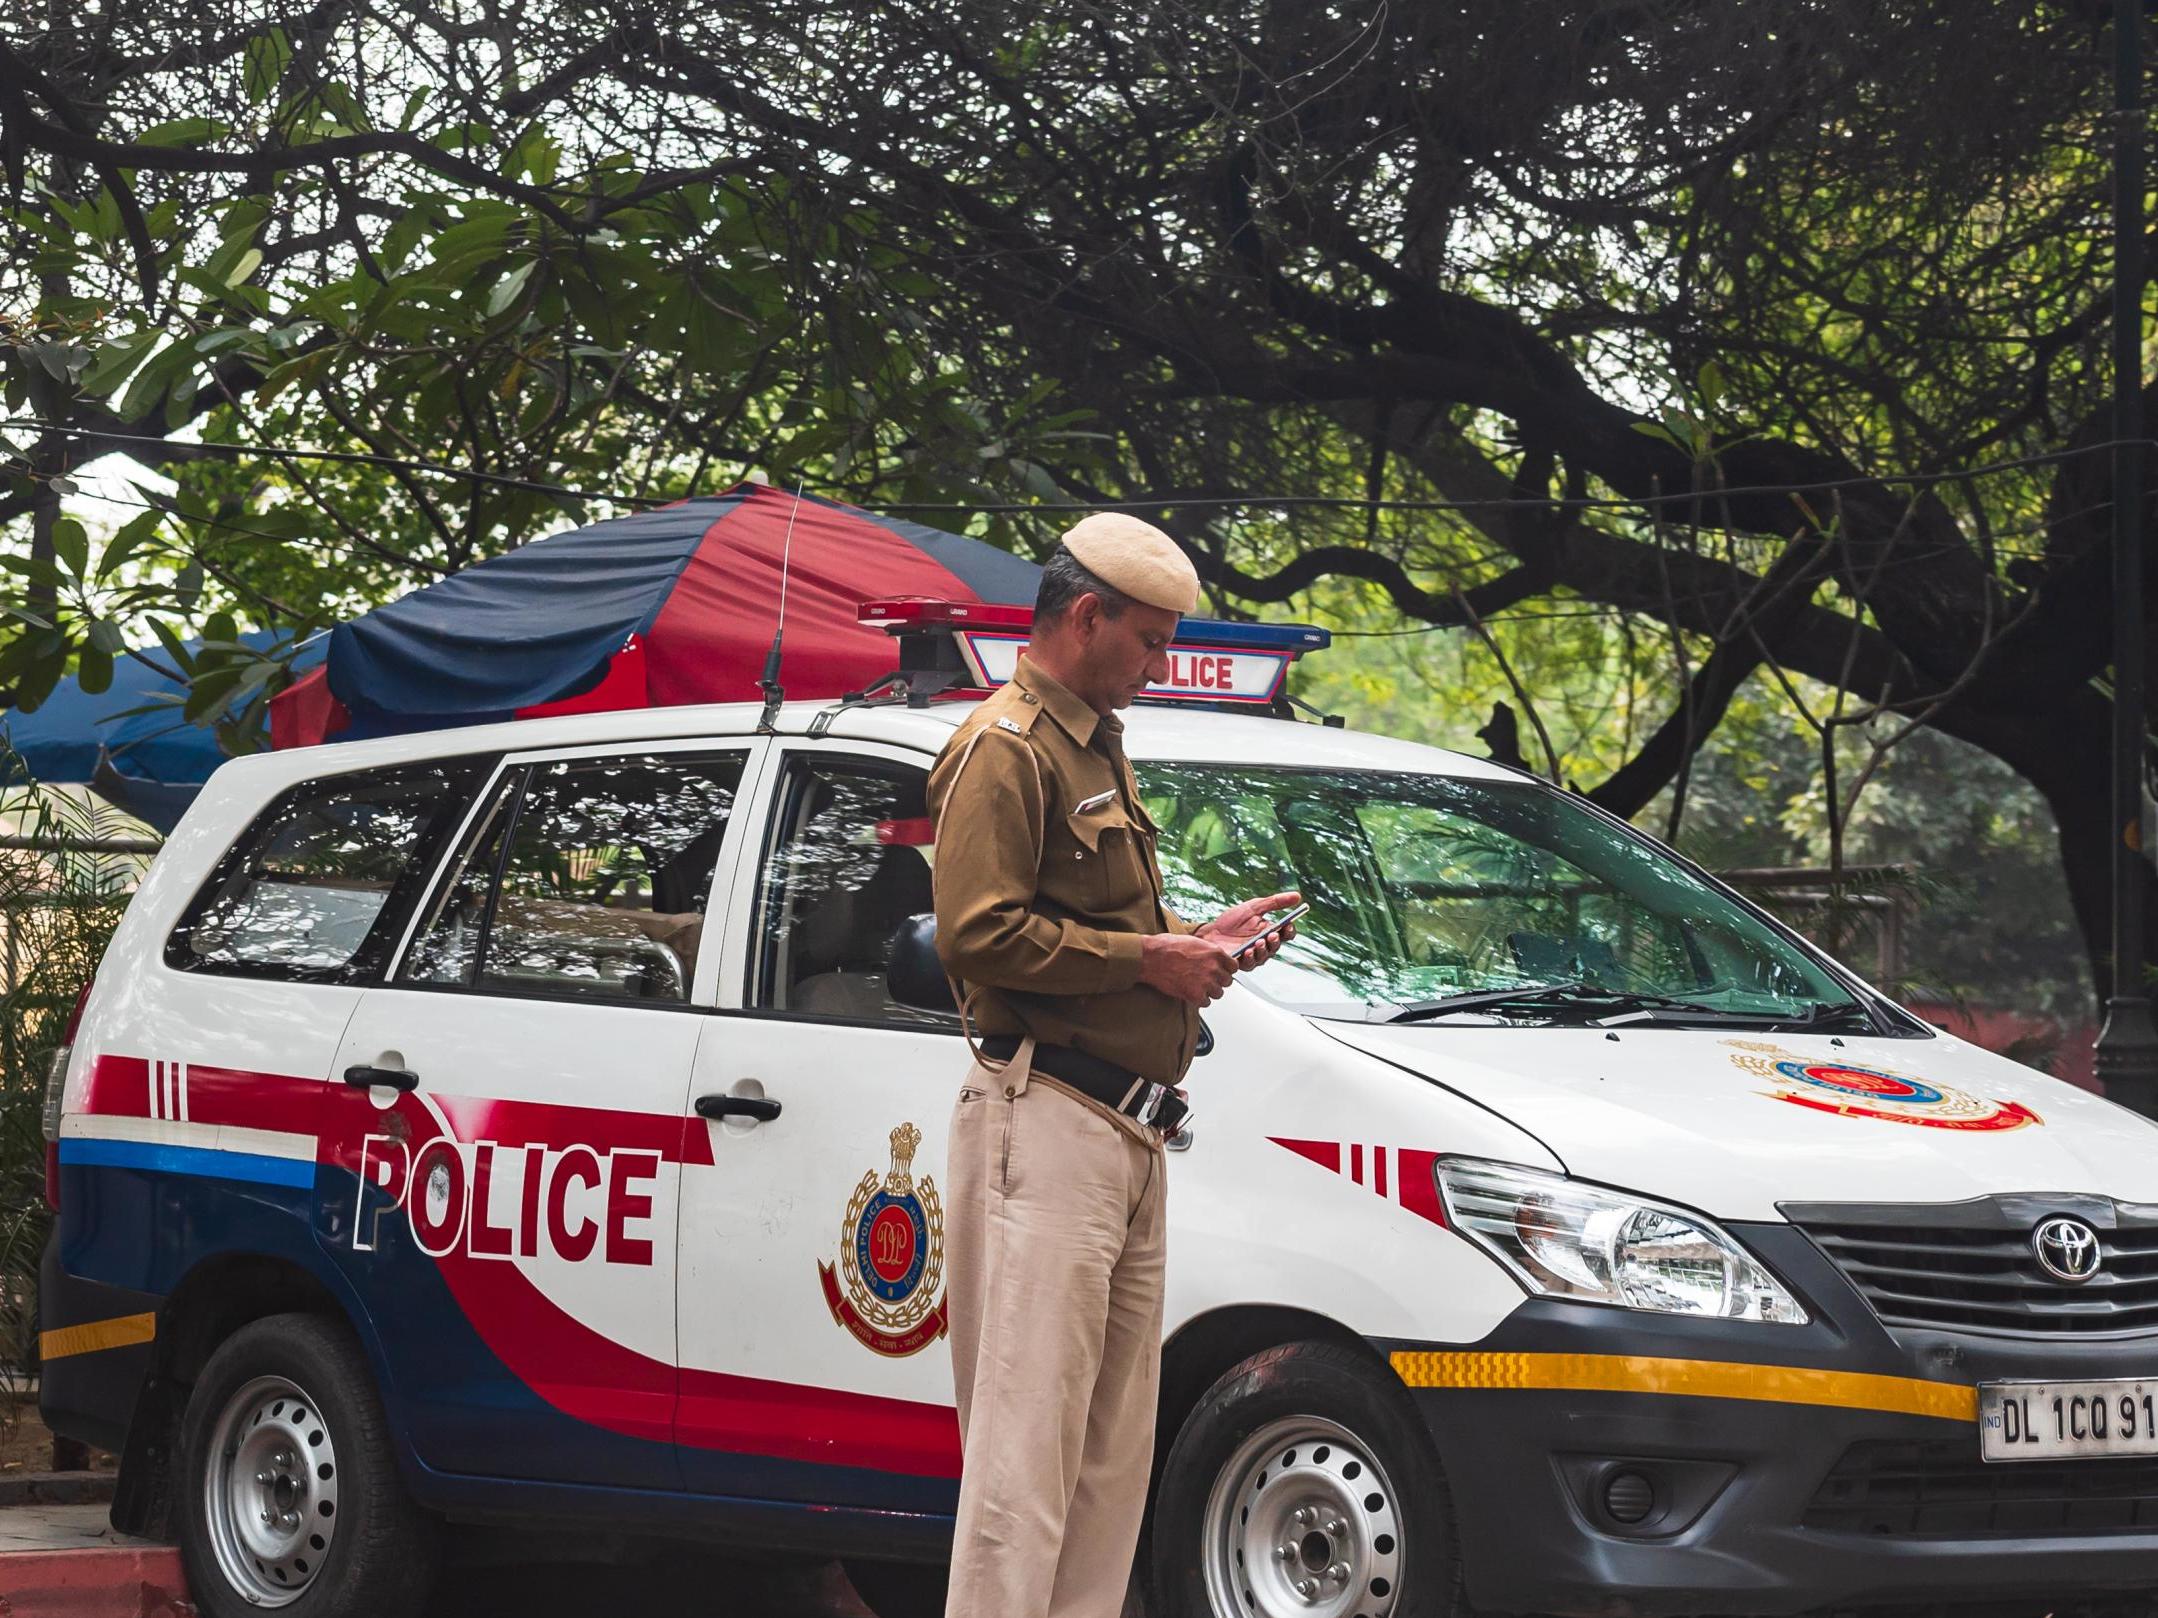 Police in India are enforcing the world's largest lockdown